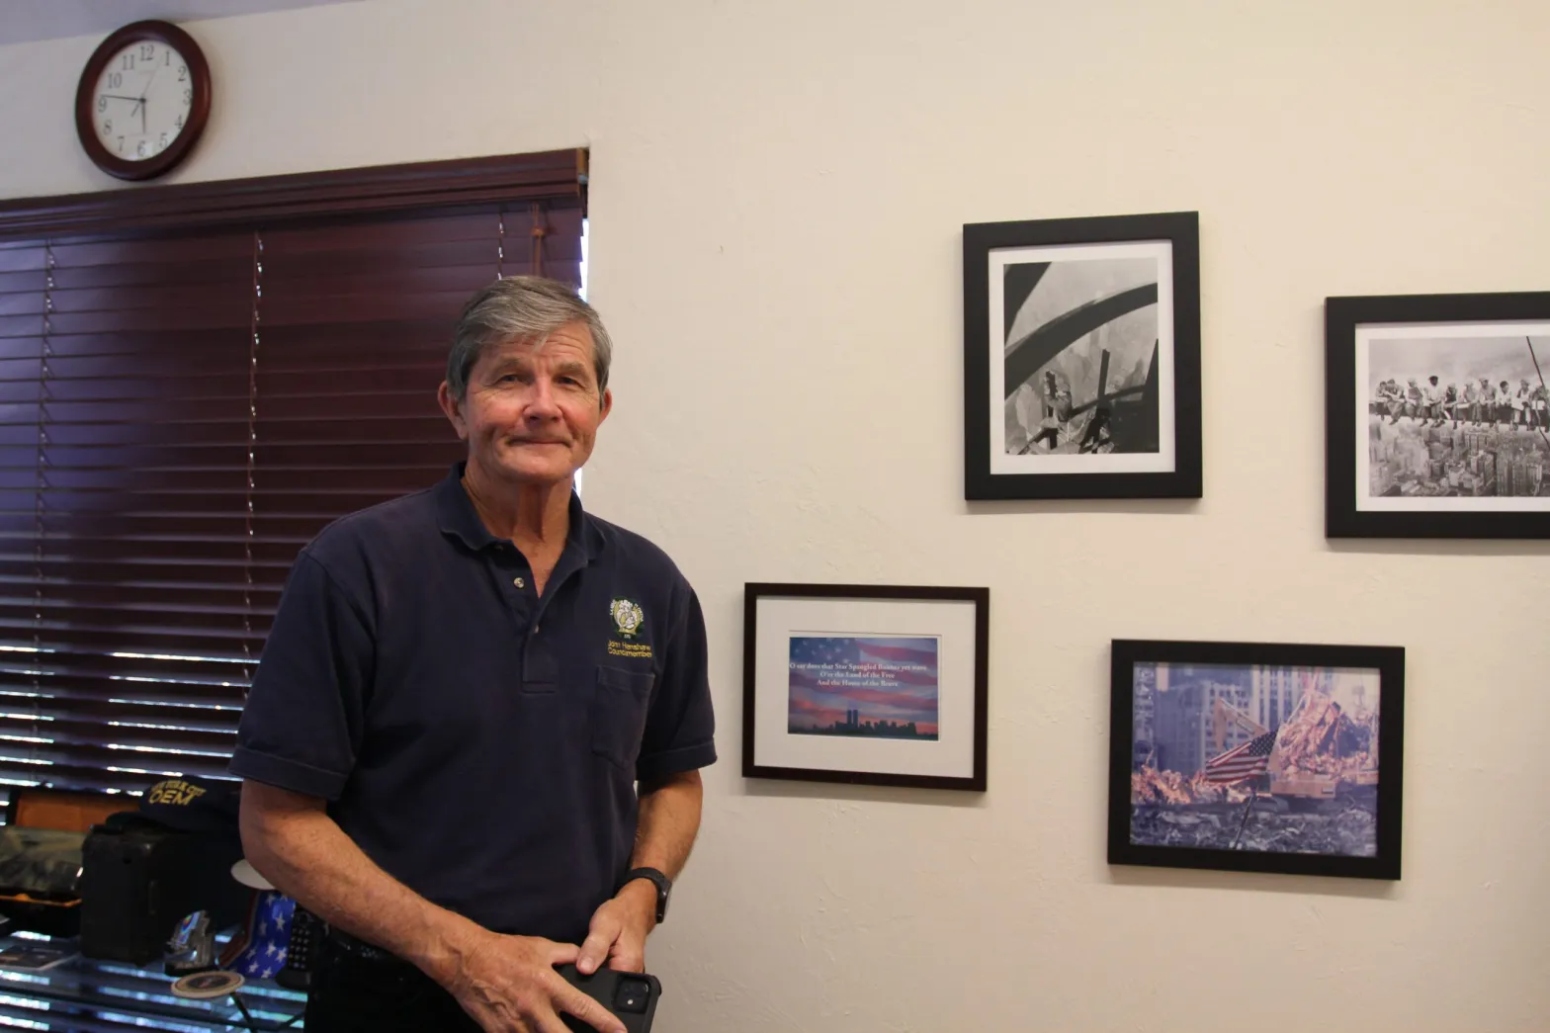 John Henshaw stands next to a photo gallery of 9/11 photos on the wall.